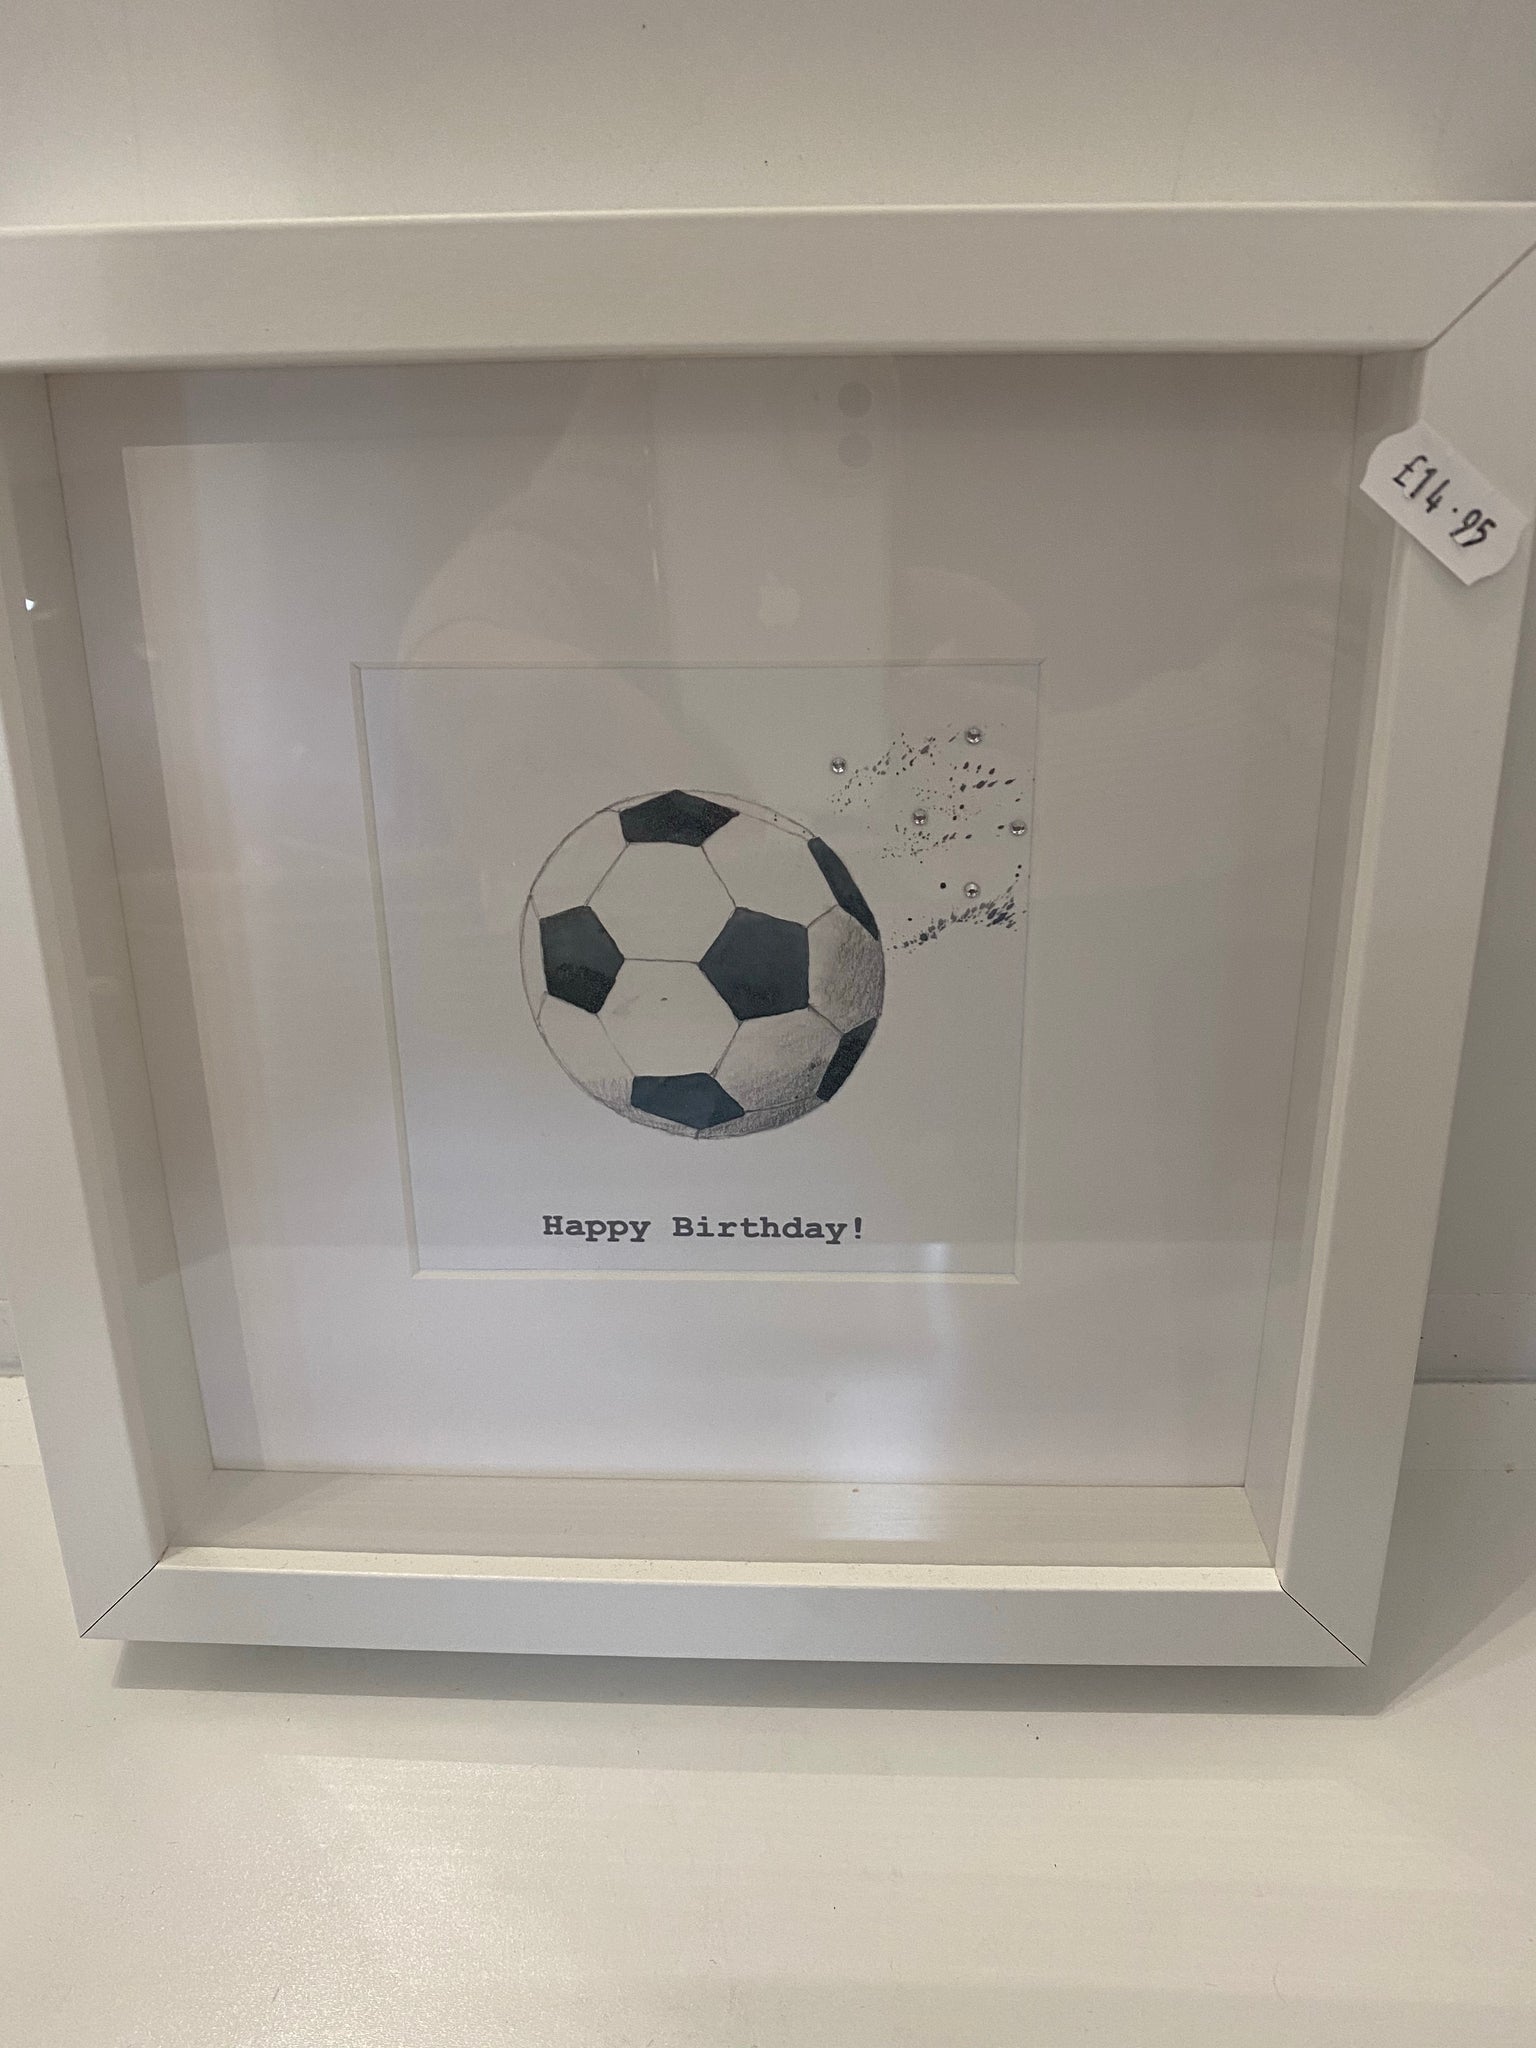 Happy birthday football framed picture